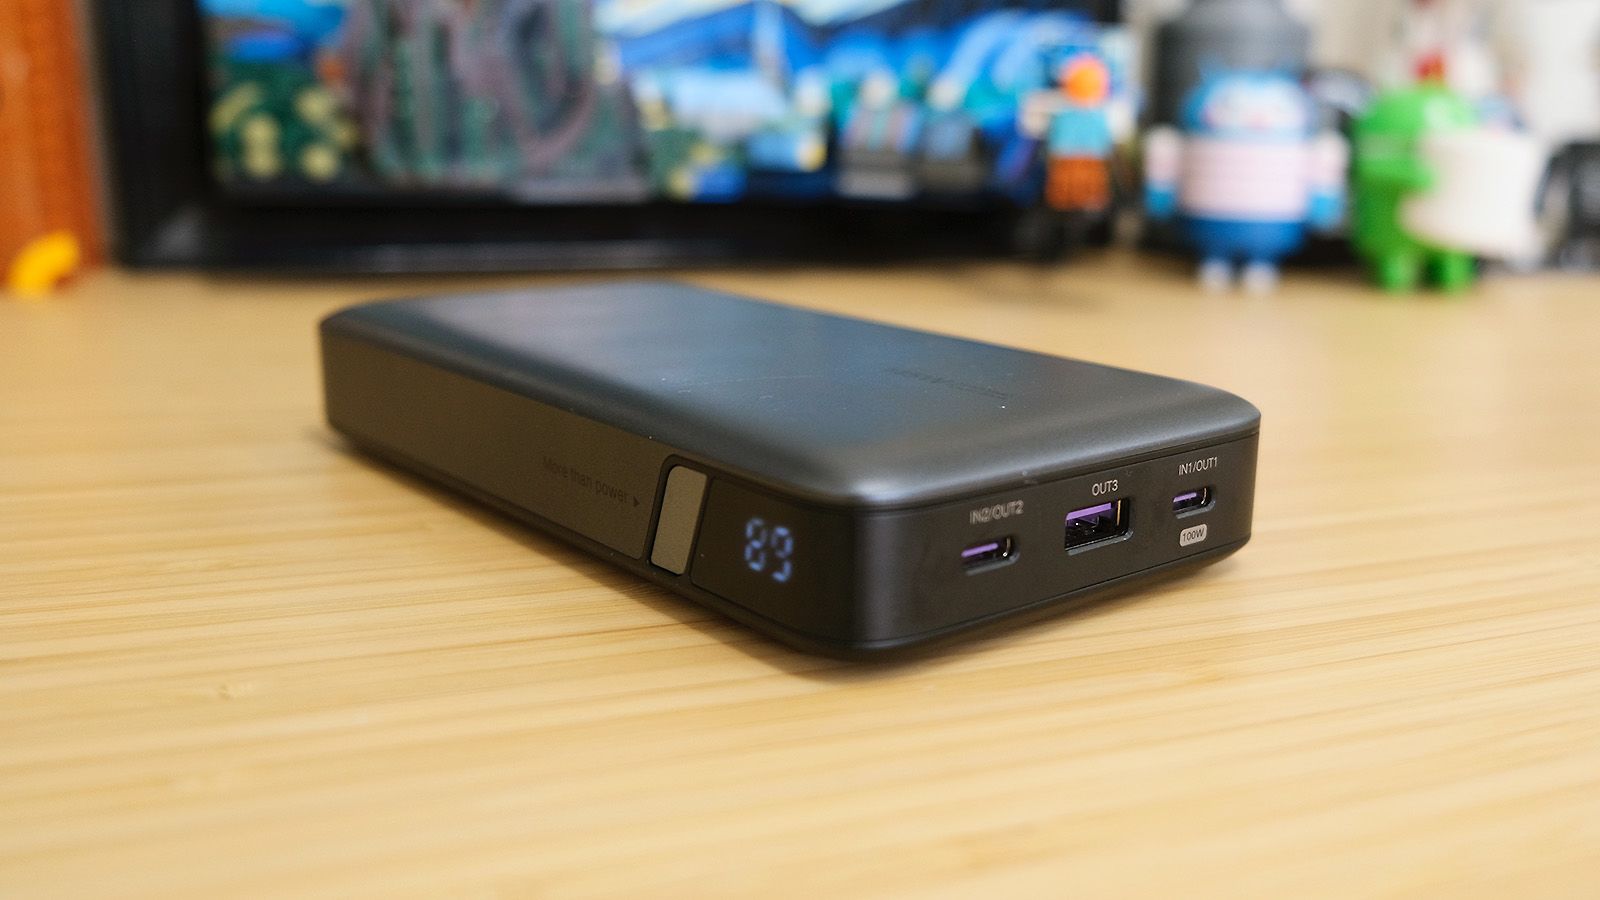 Keep the power: How to treat your power bank right